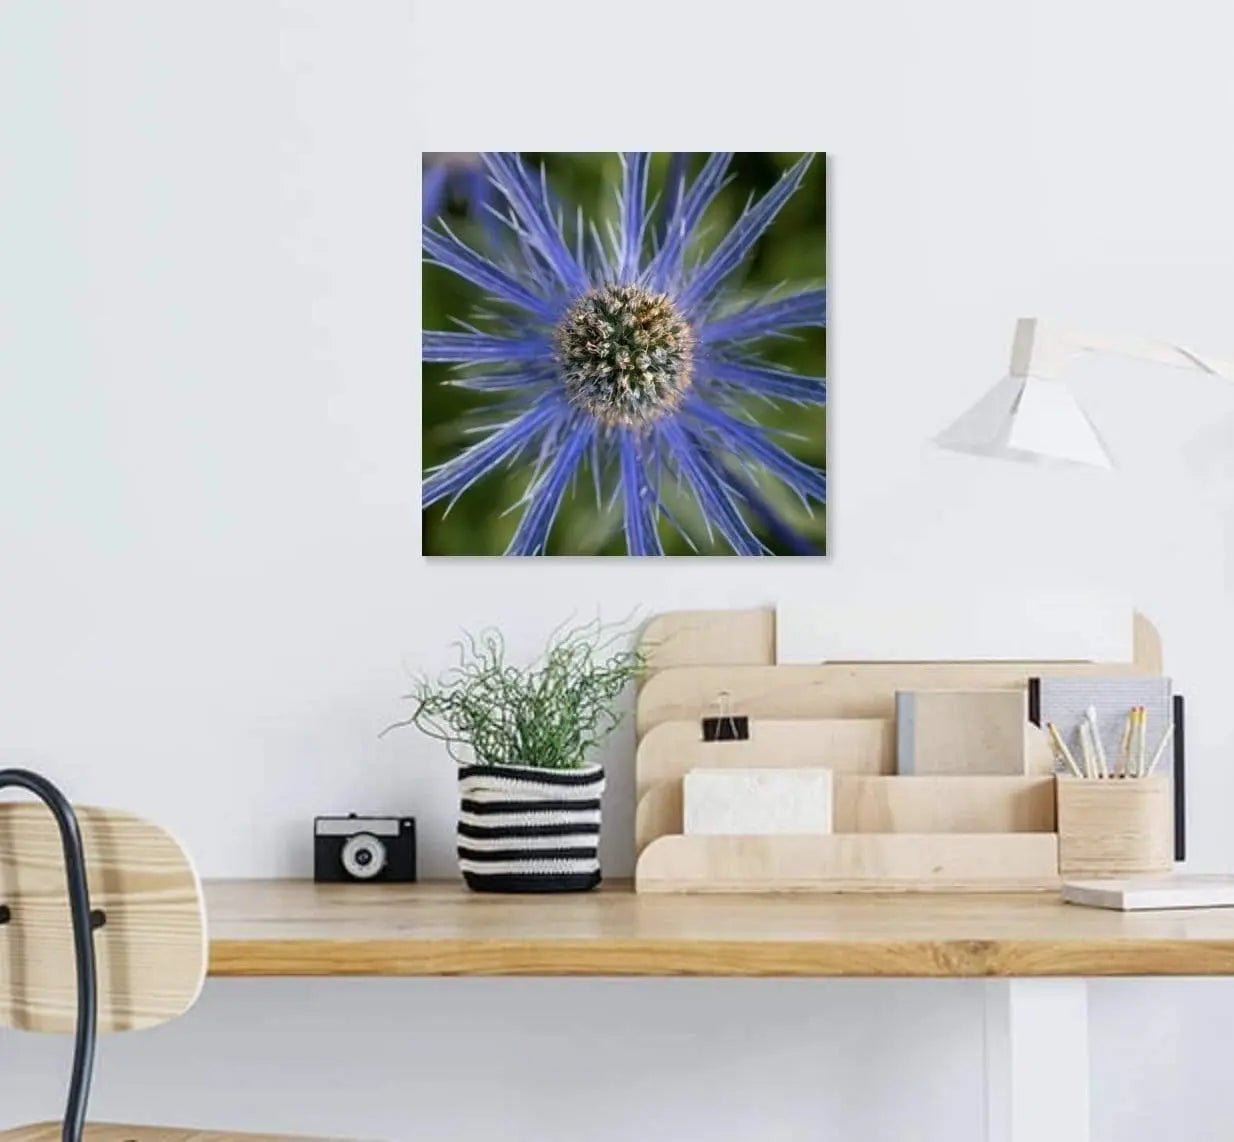 Blue sea holly flower displayed on wall over office desk 